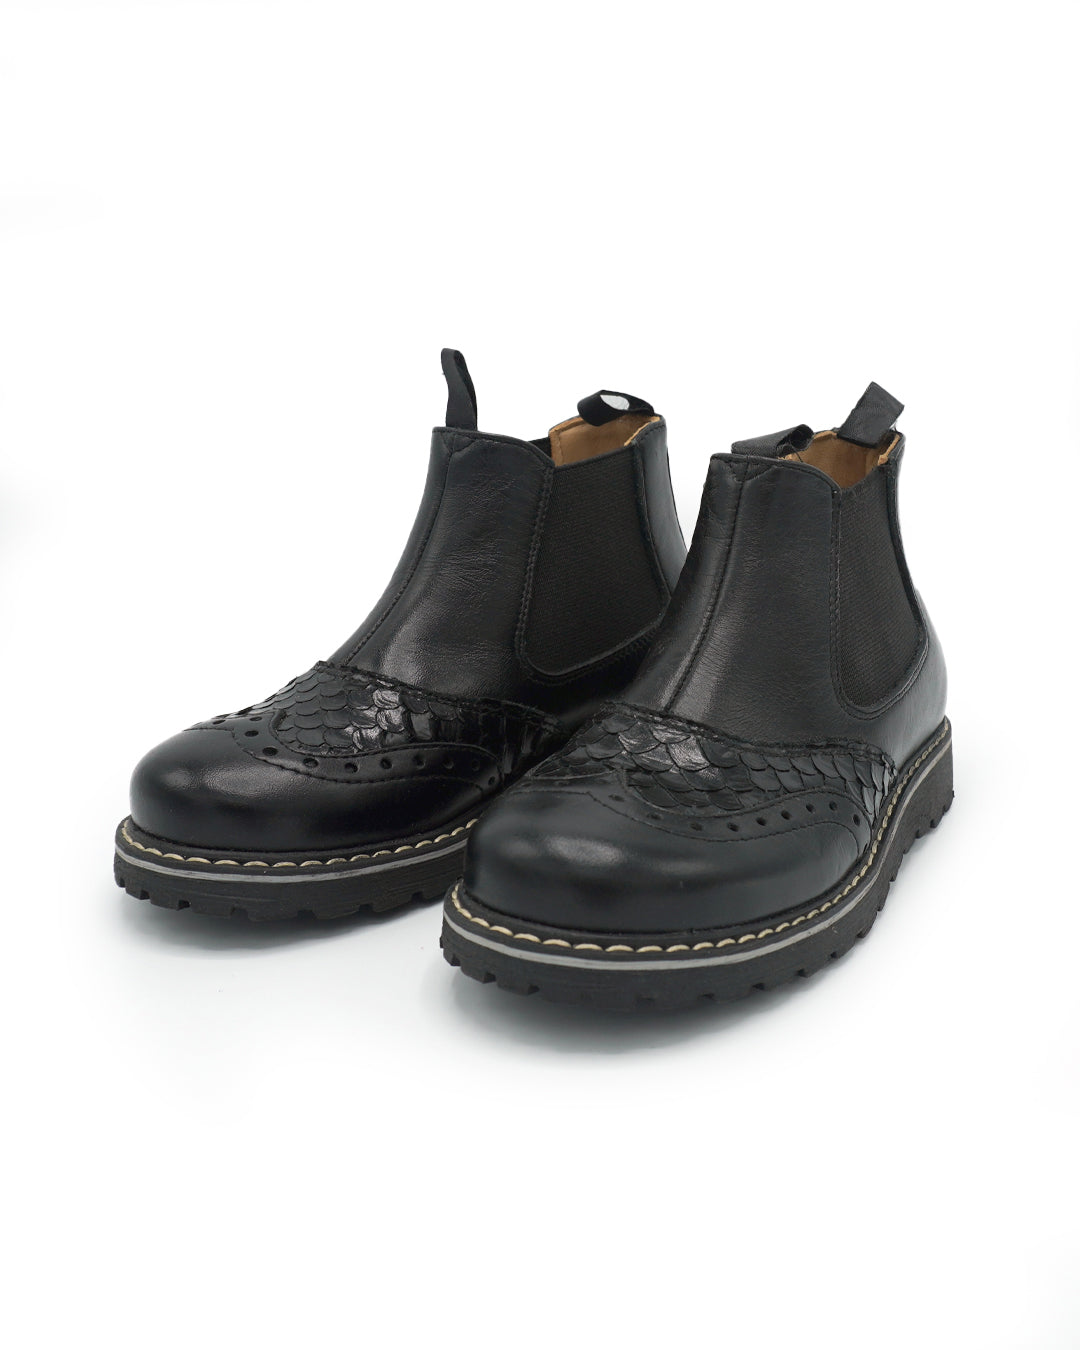 Slip on Oxford Style Leather Boots